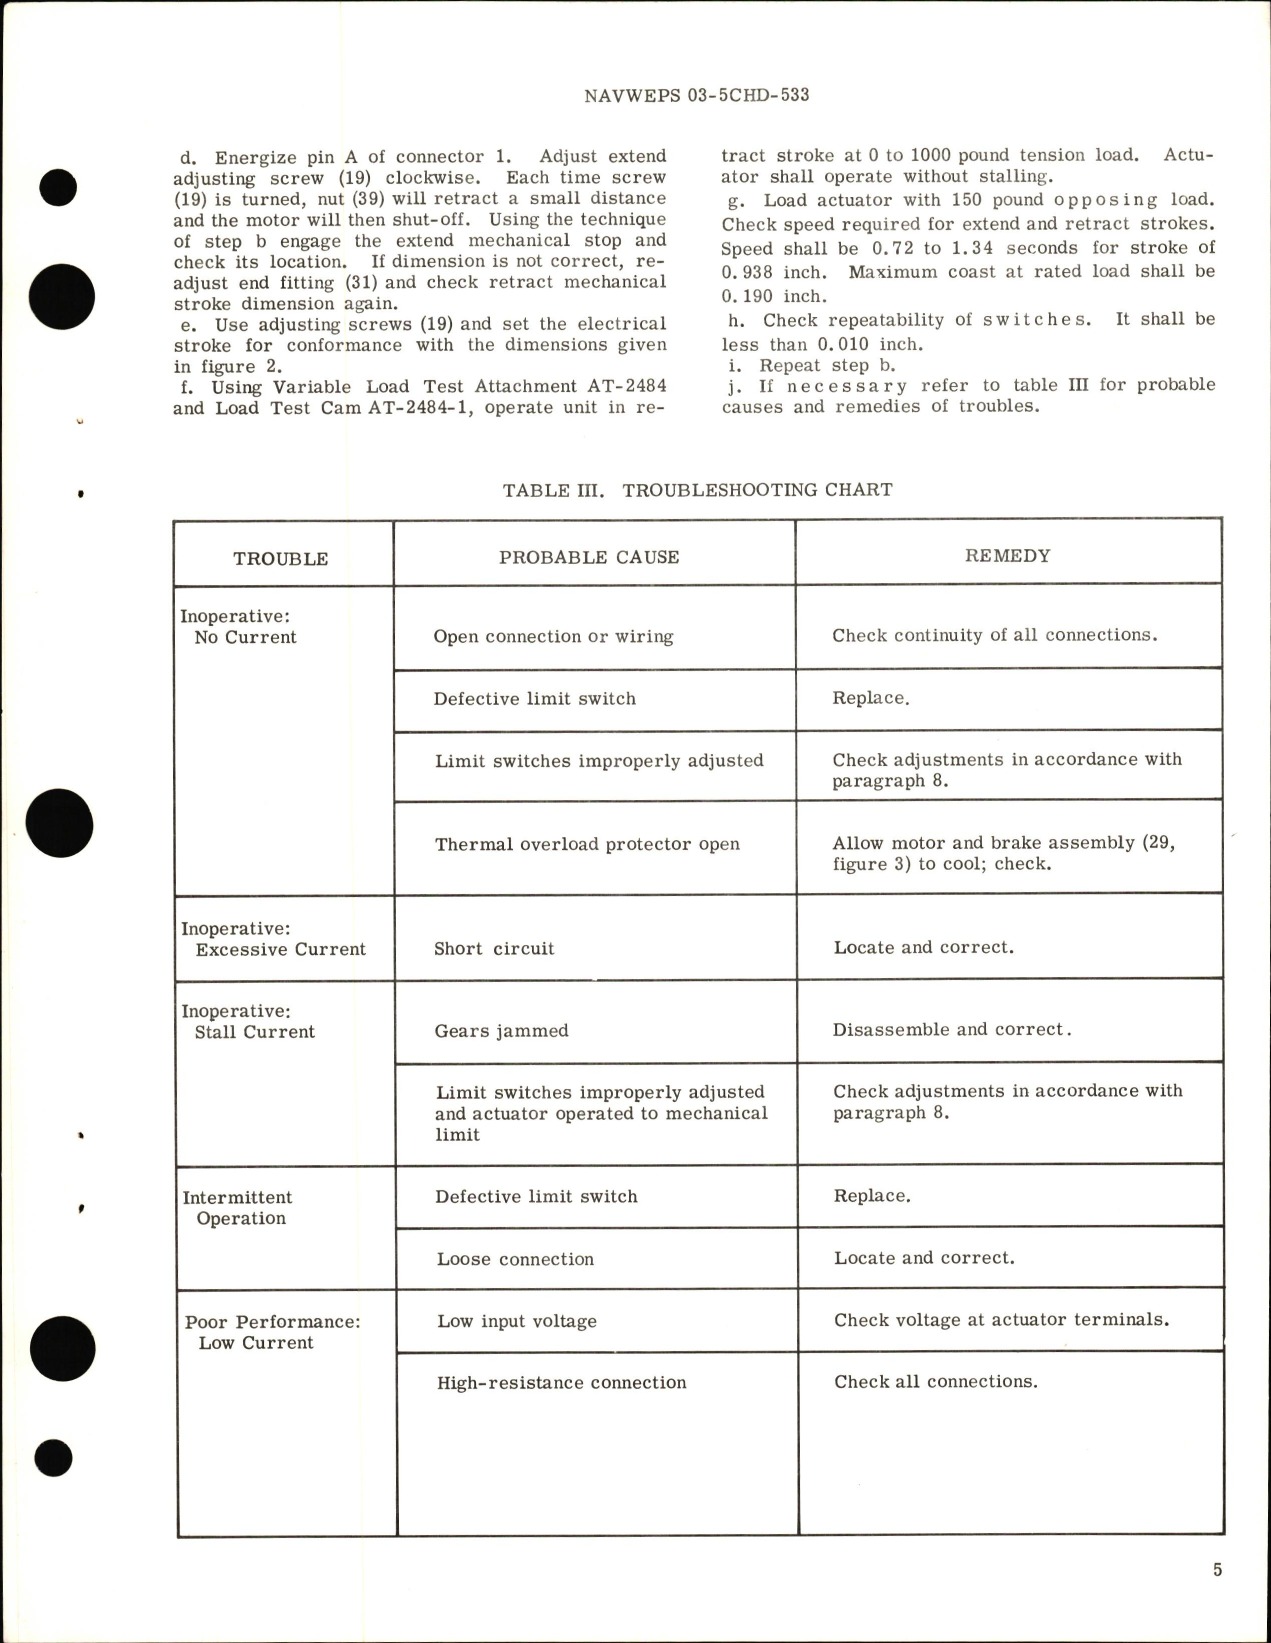 Sample page 5 from AirCorps Library document: Overhaul Instructions with Parts Breakdown for Electro-Mechanical Linear Actuator Models R584M8, R584M8-1, R584M8-1-1